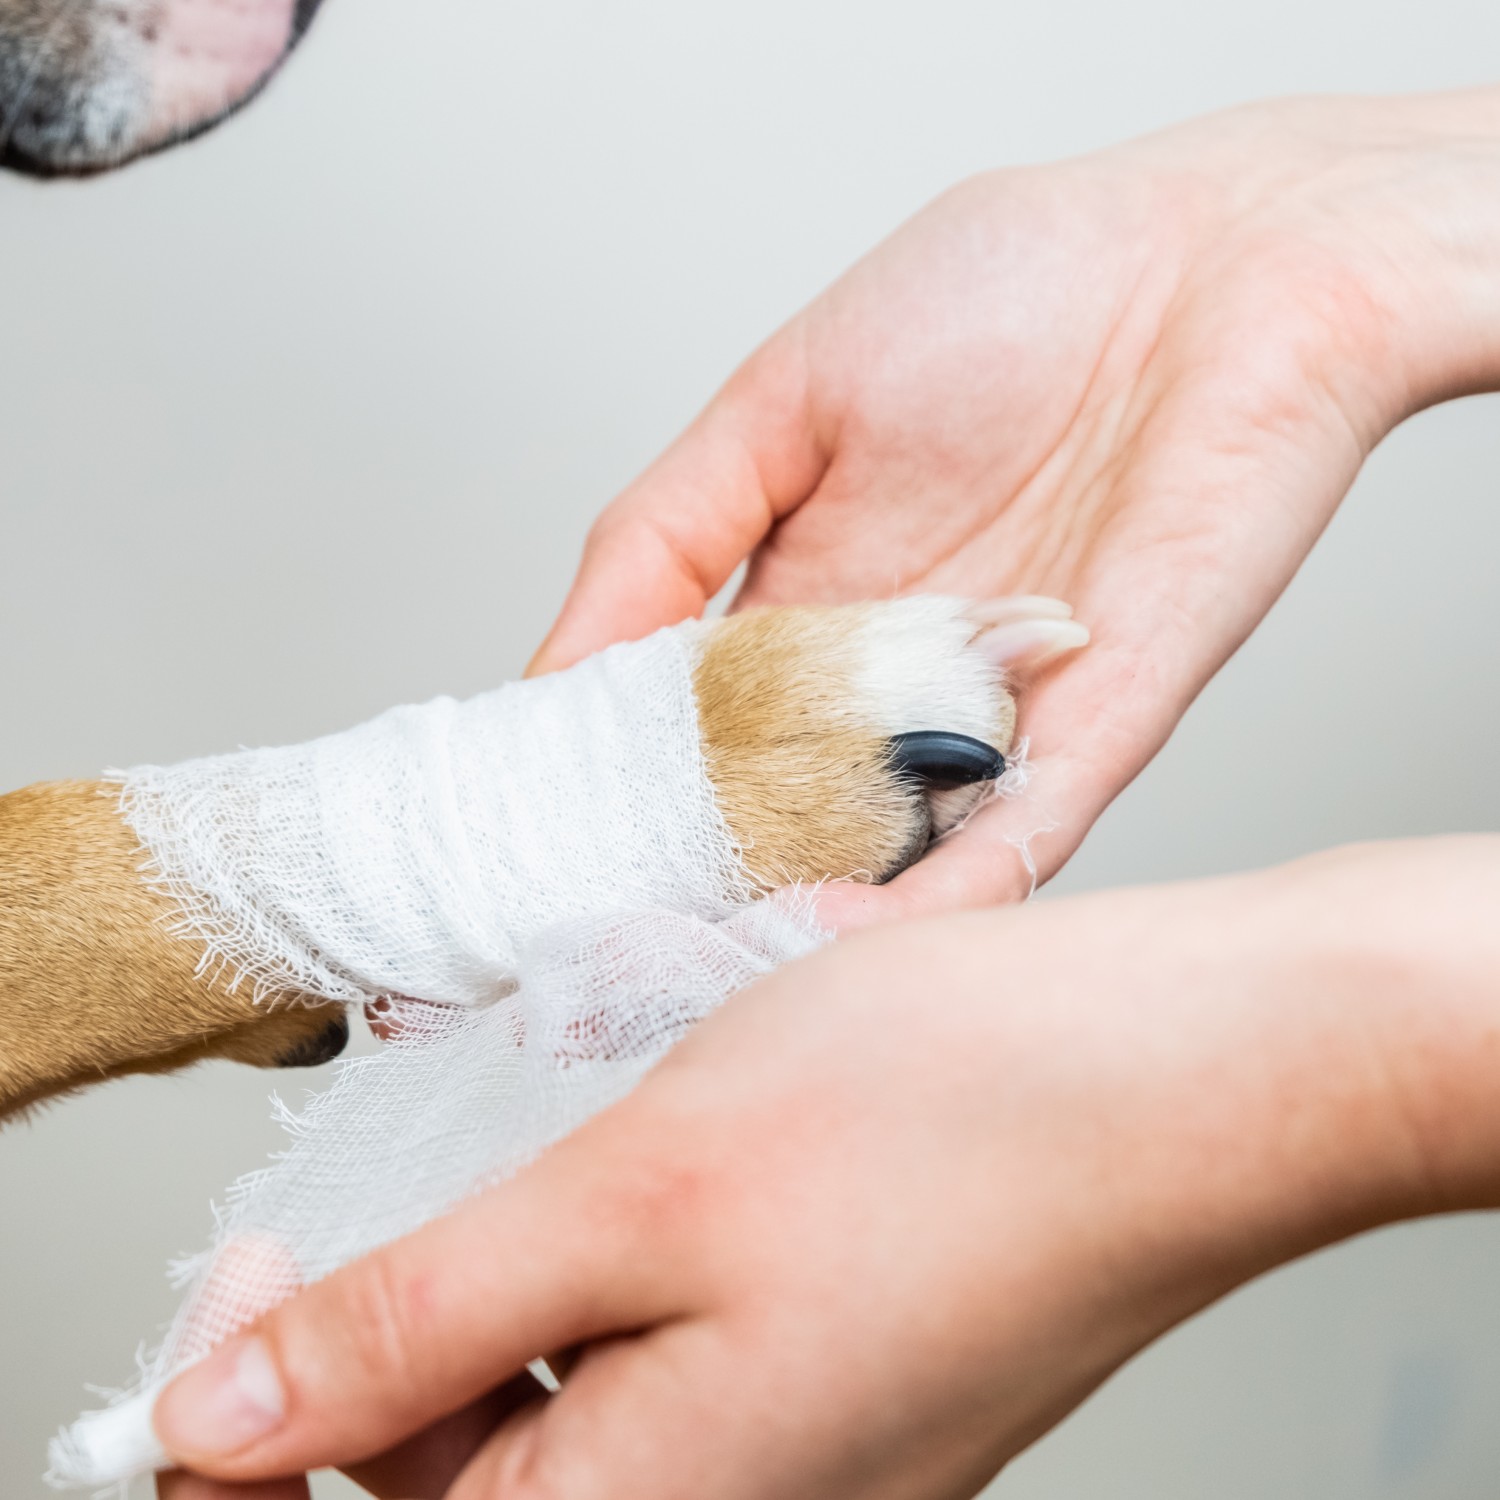 Person wrapping Dog Paw - Emergency Care